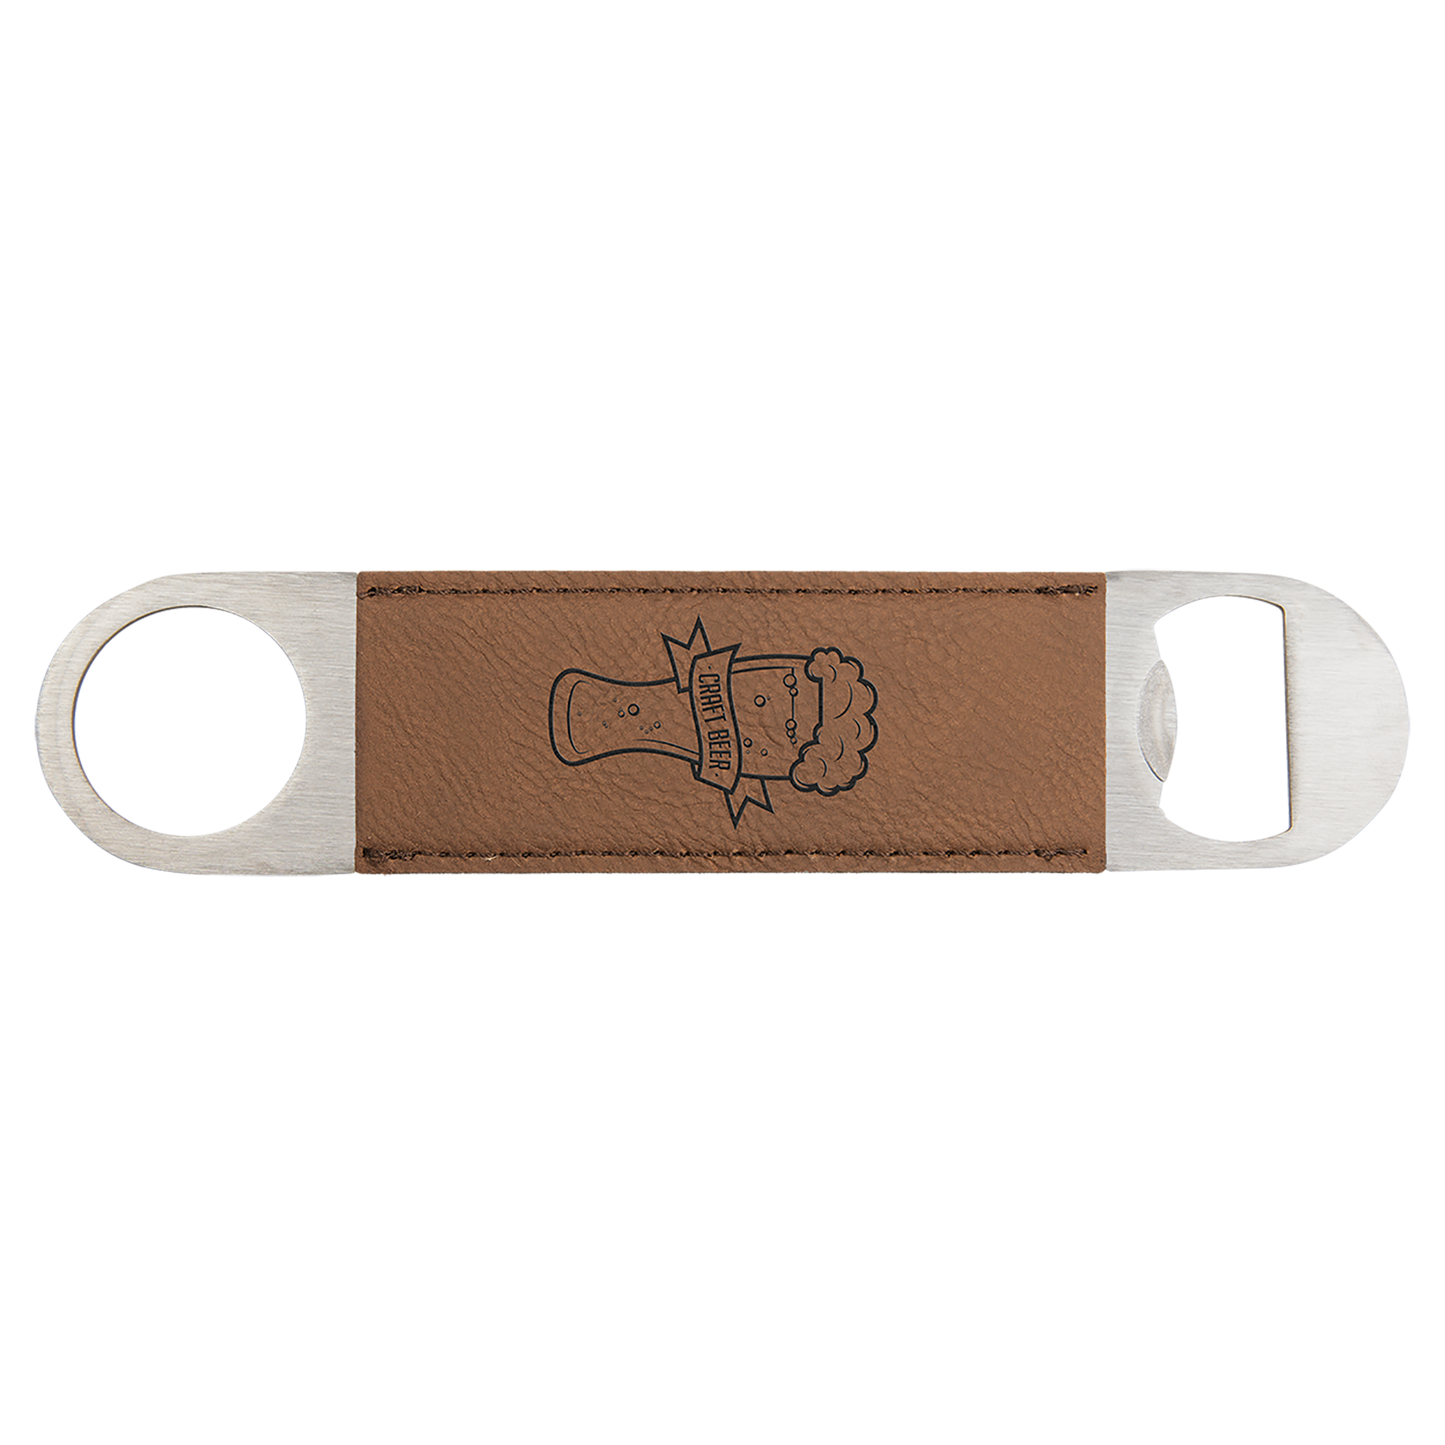 Personalized Leather Bottle Opener